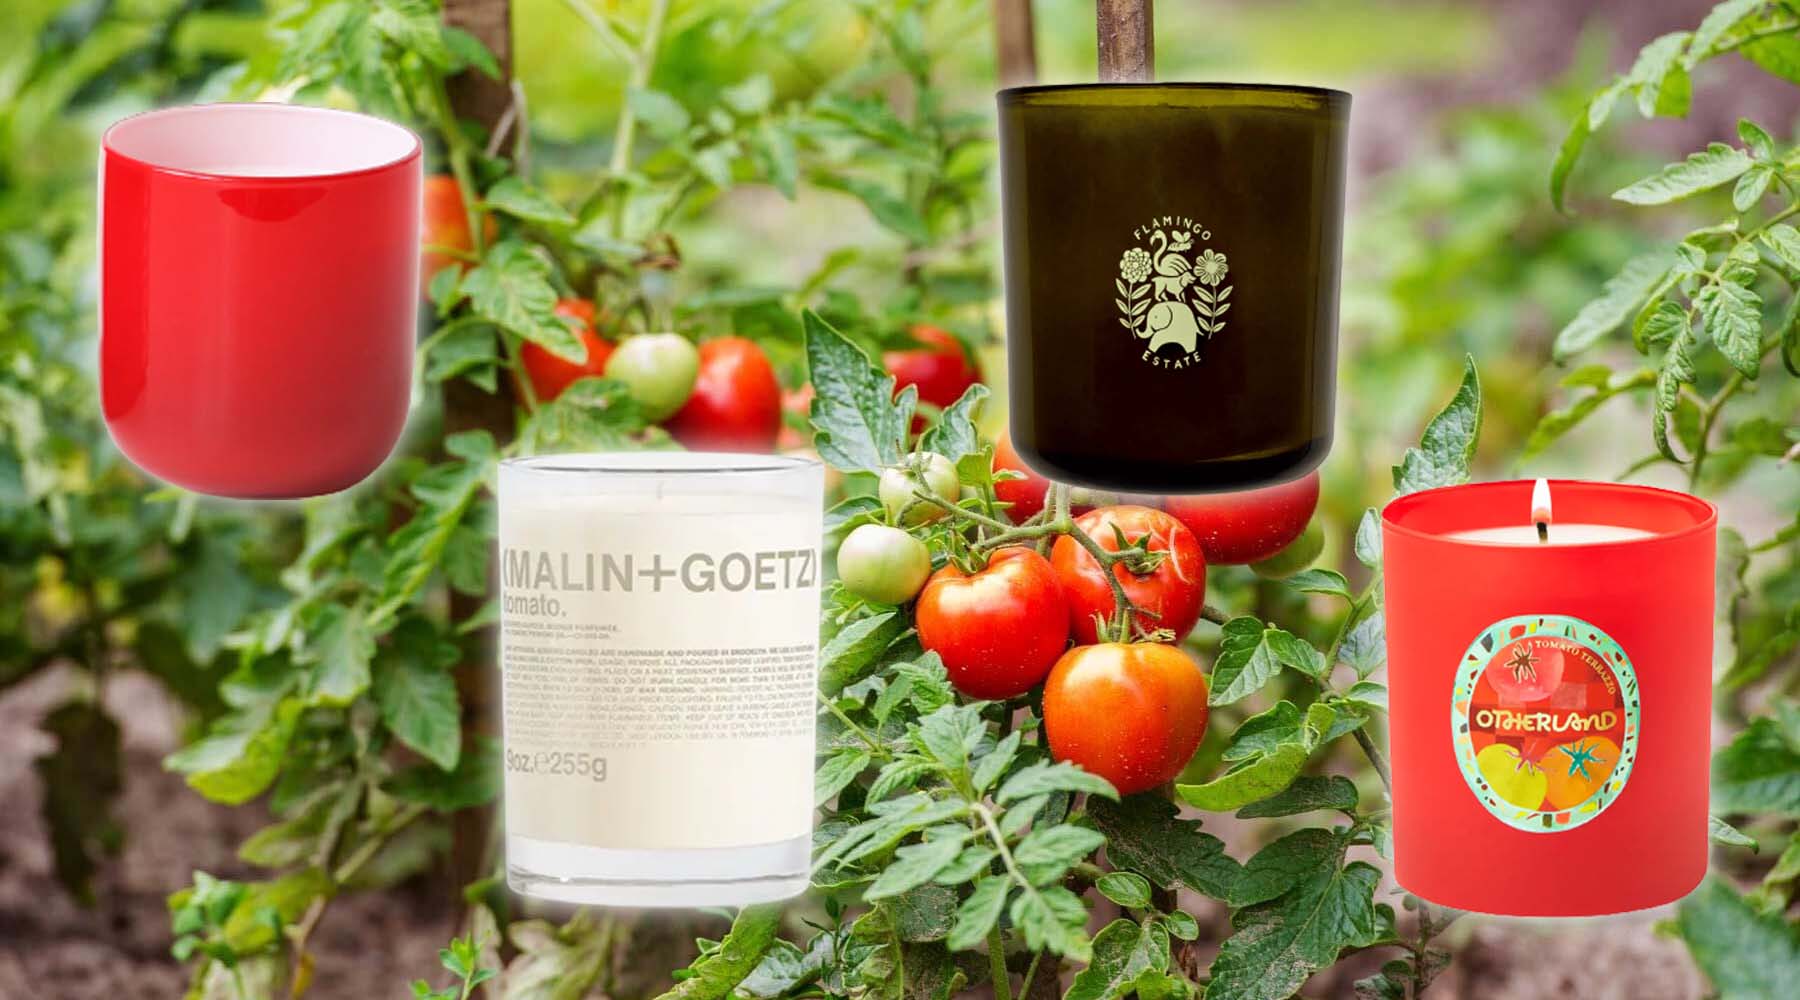 Tomato-Scented Candles Are Suddenly Everywhere—and These Ones Are the Best thumbnail